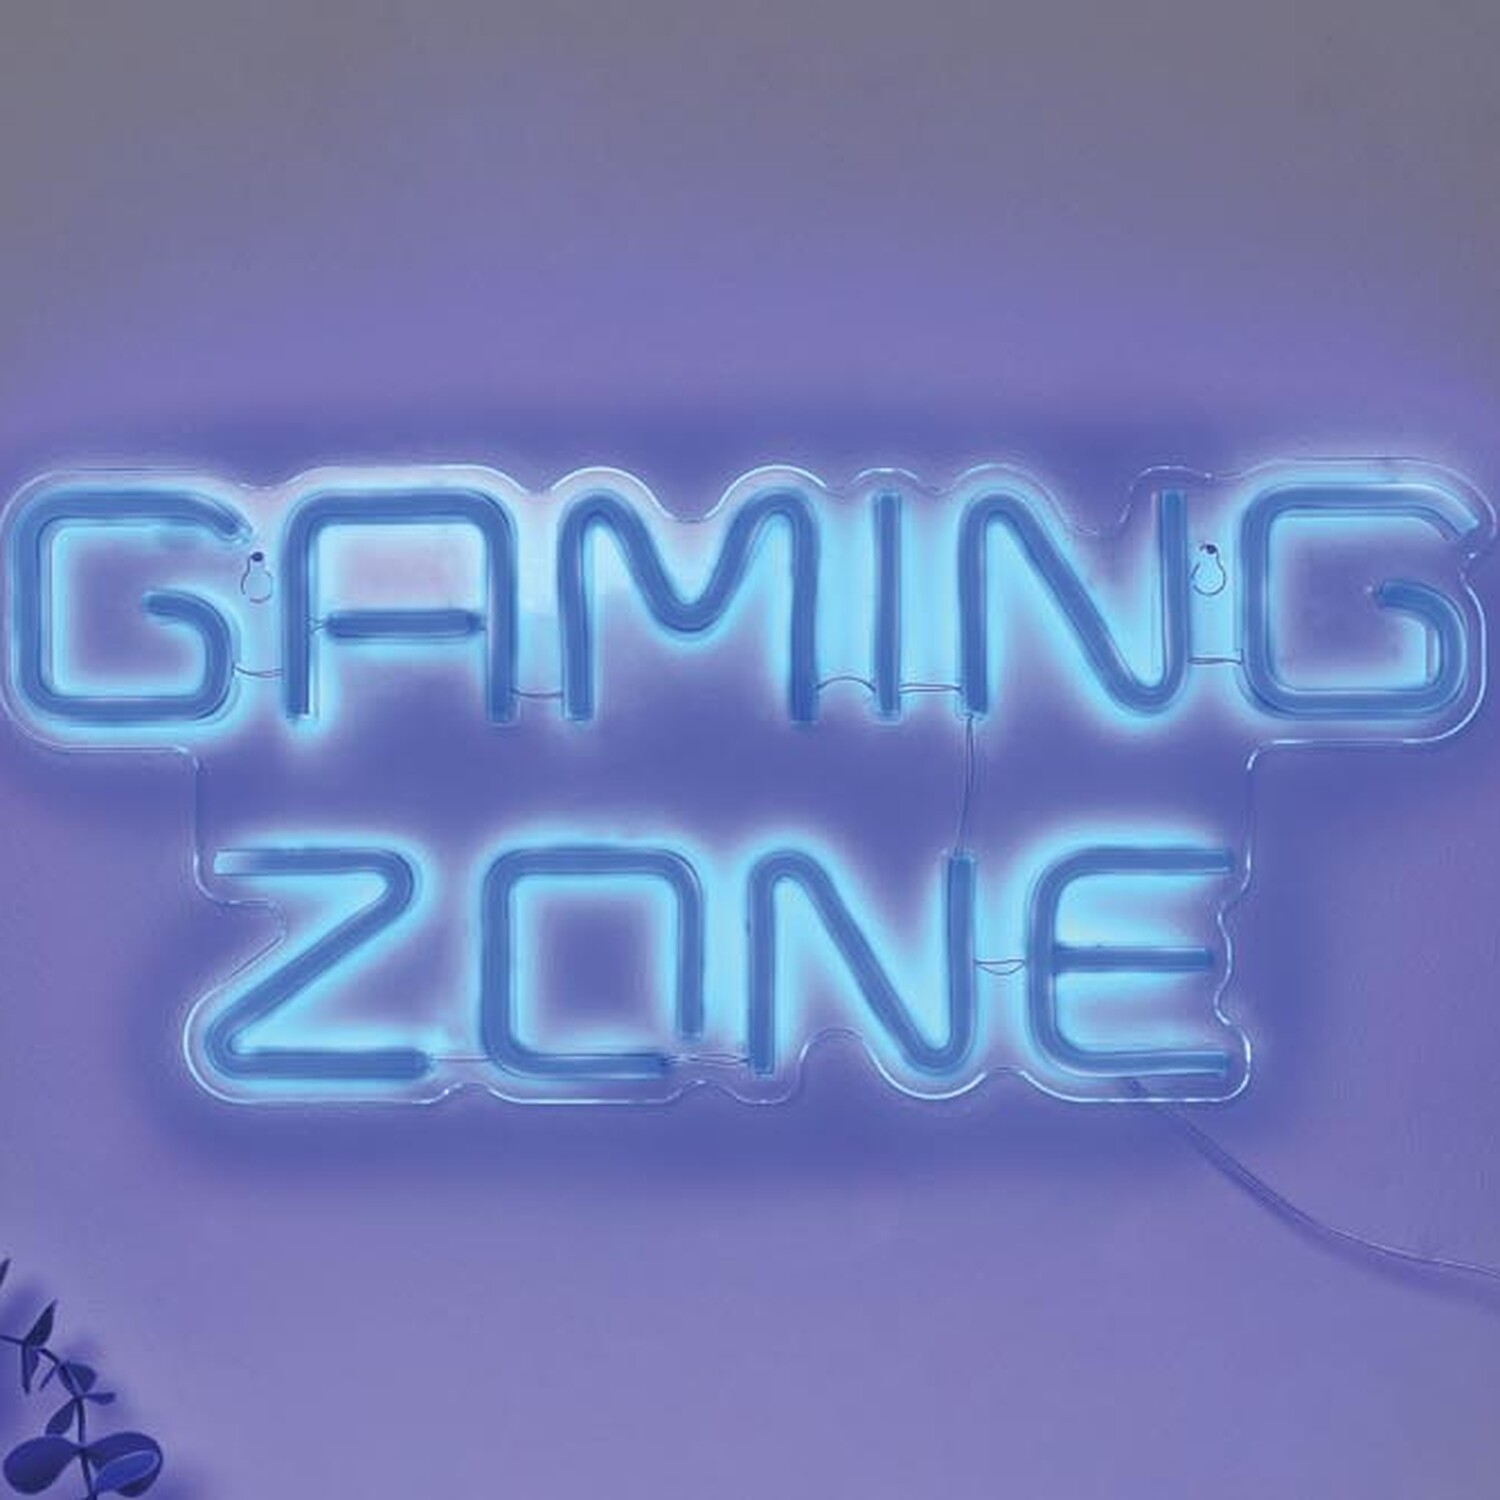 Gaming Zone LED Neon Sign Image 2